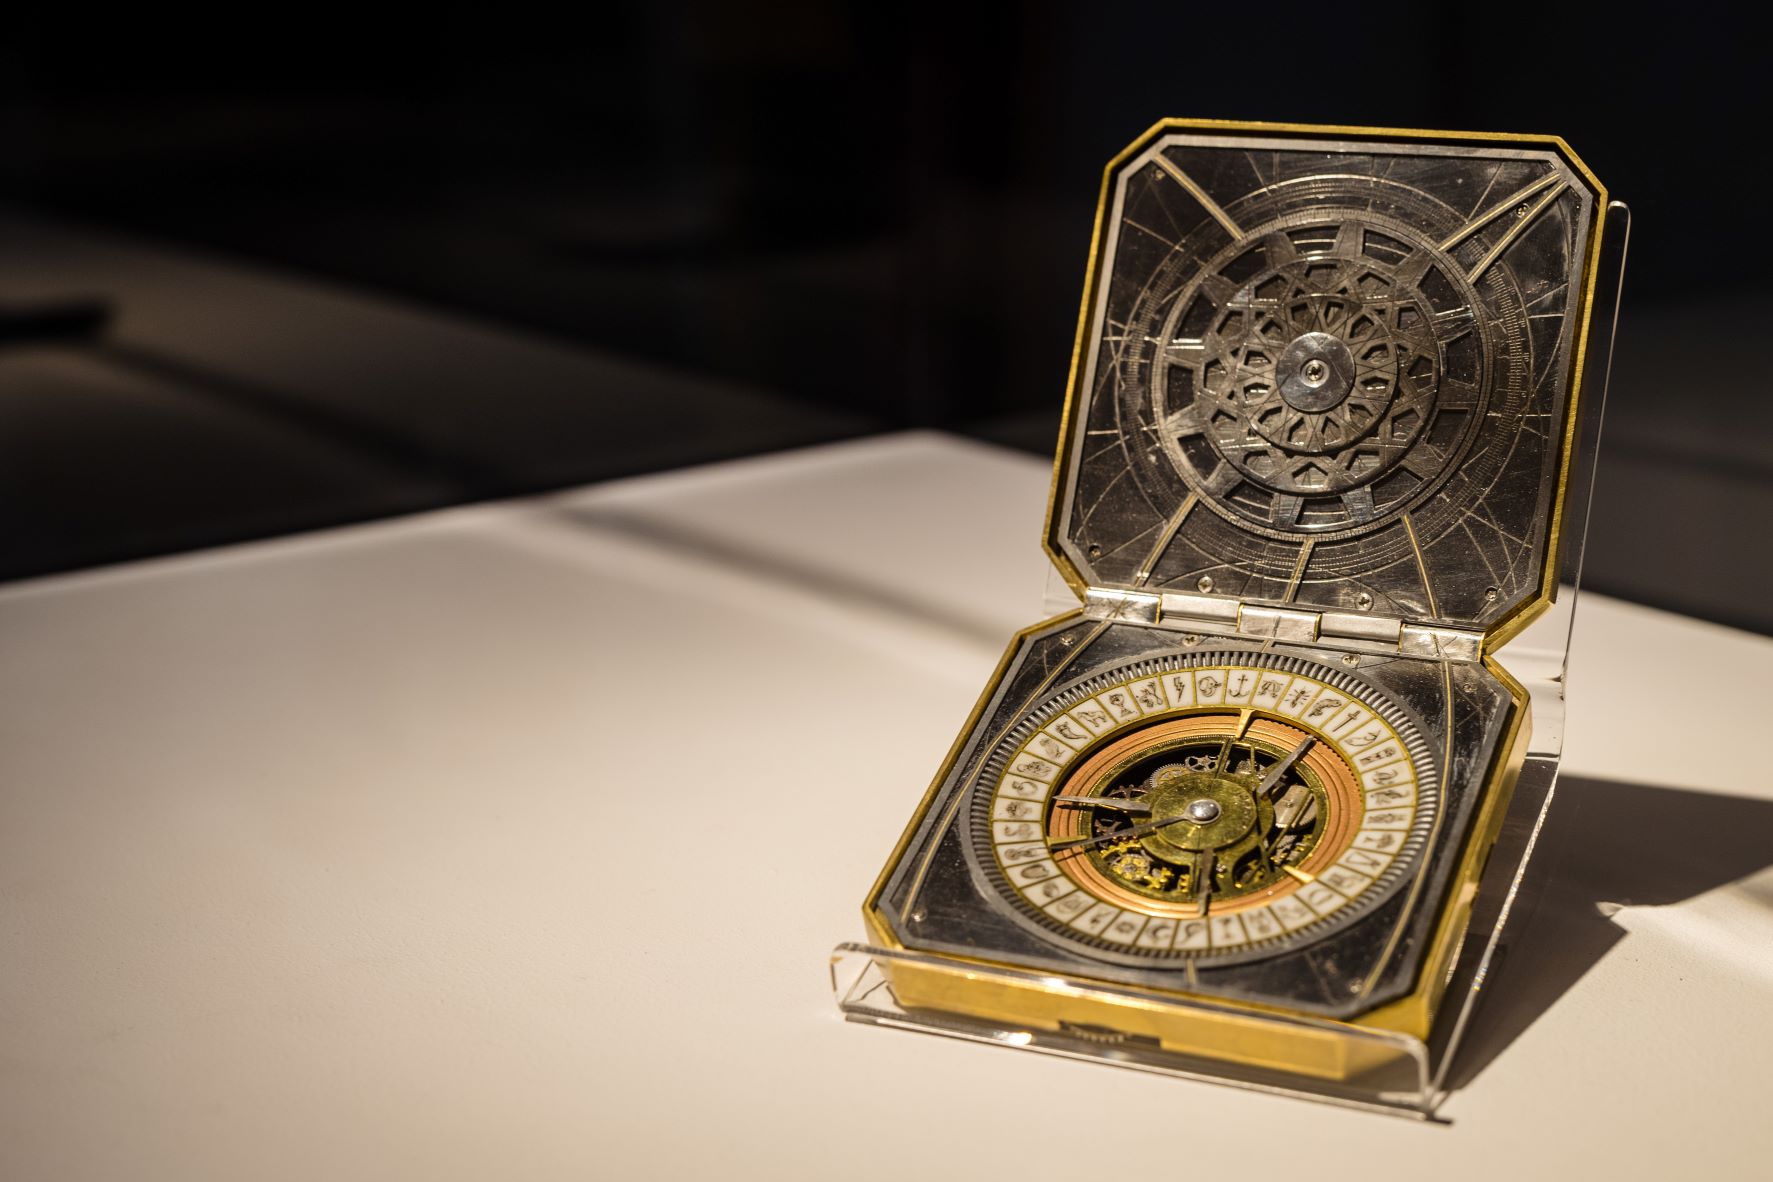 Photo of the alethiometer device from His Dark Materials